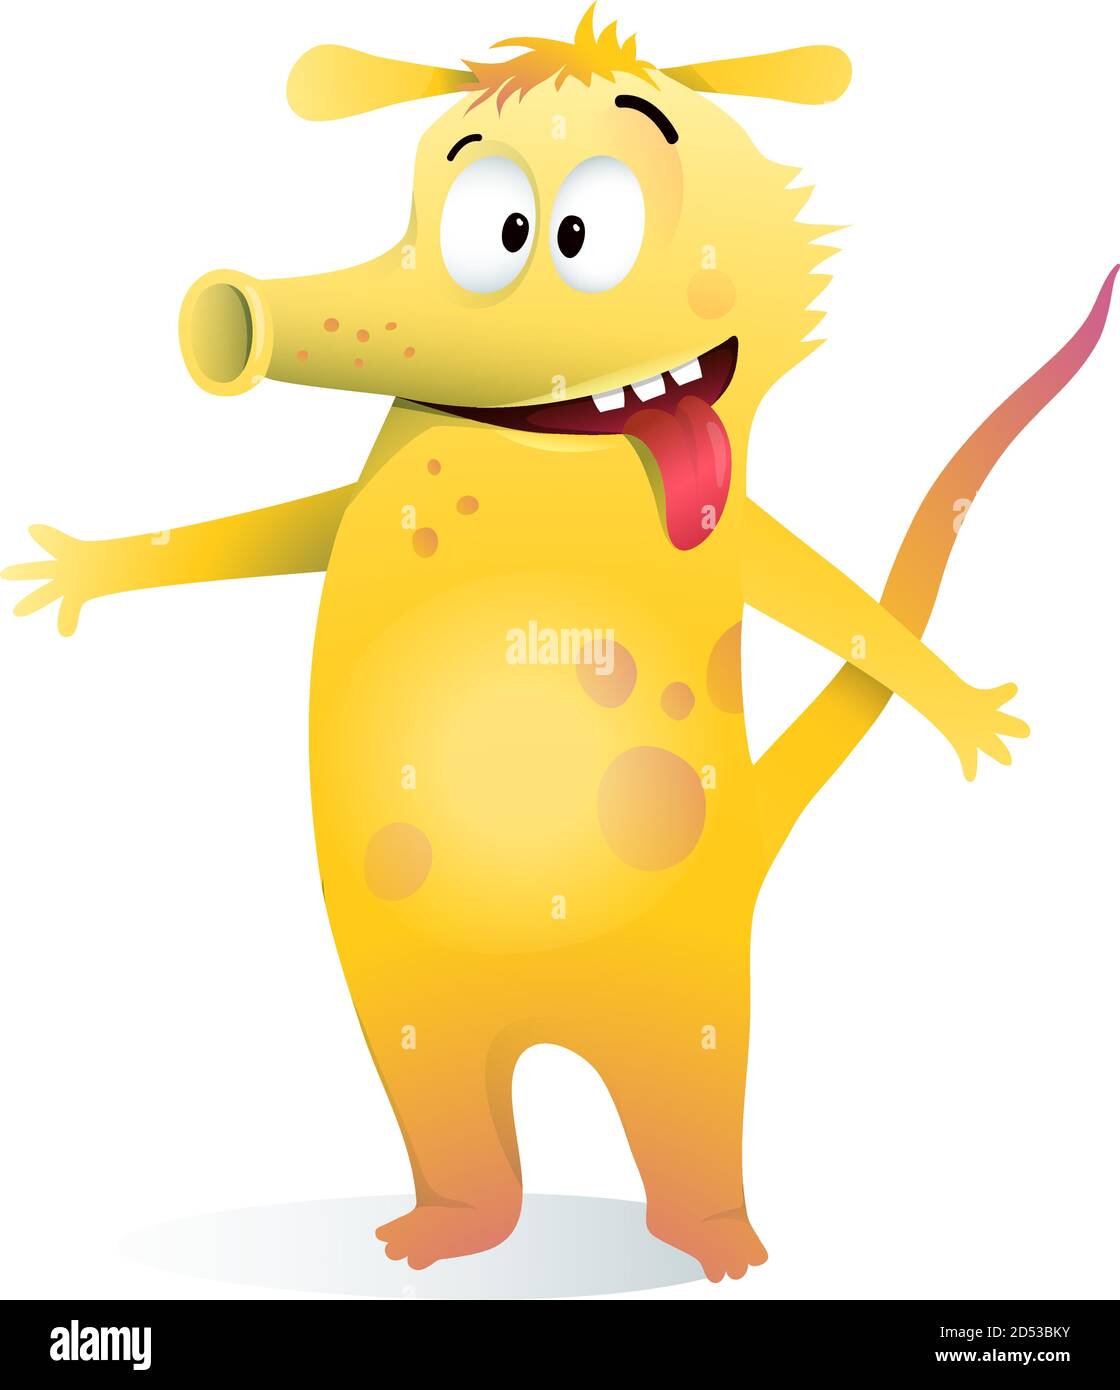 Cute Monster for Kids Inviting Calling or Greeting Stock Vector